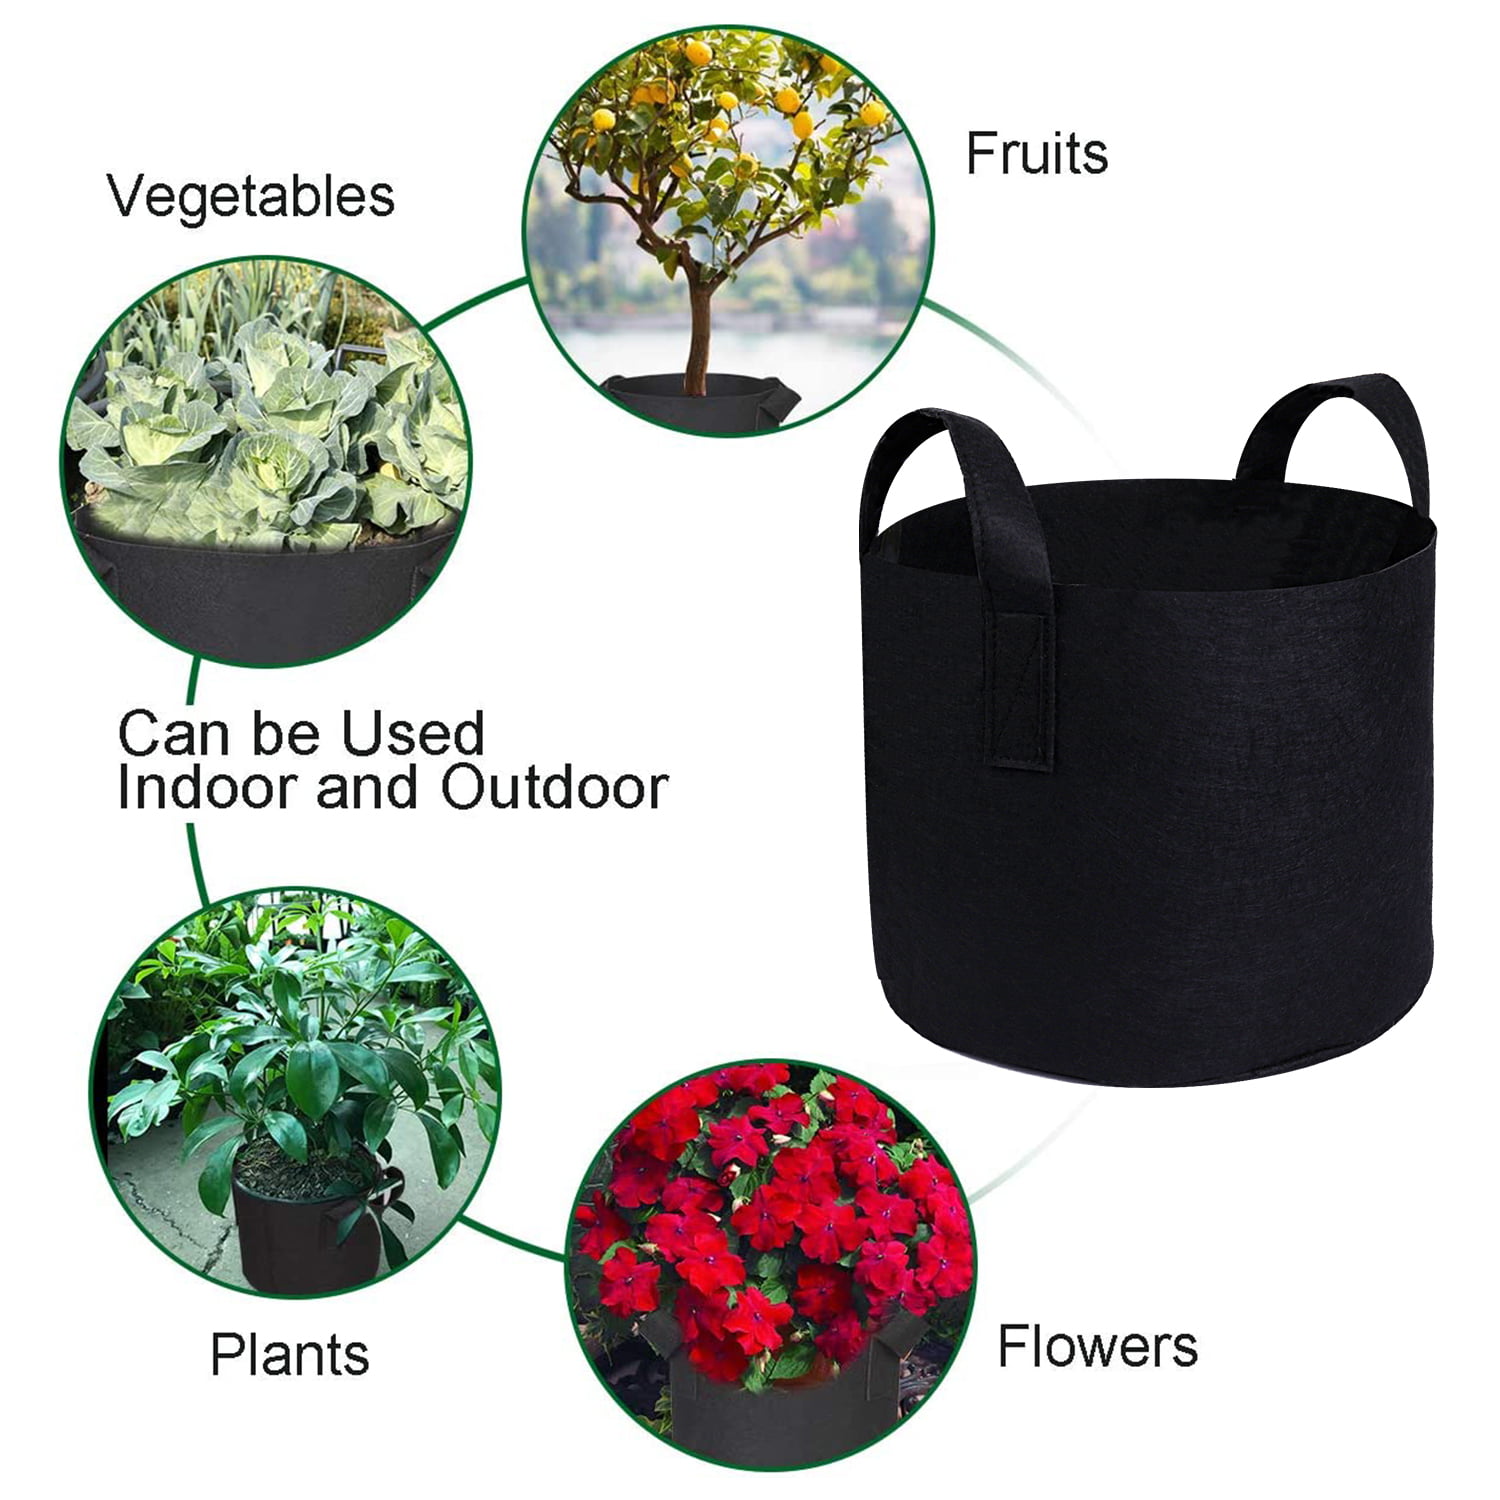 DDSKY 5Pcs 5 Gallon Plant Grow Bags Non-Woven Fabric Flower Pots with Handles for Growing Trees Flowers Fruits Vegetables 